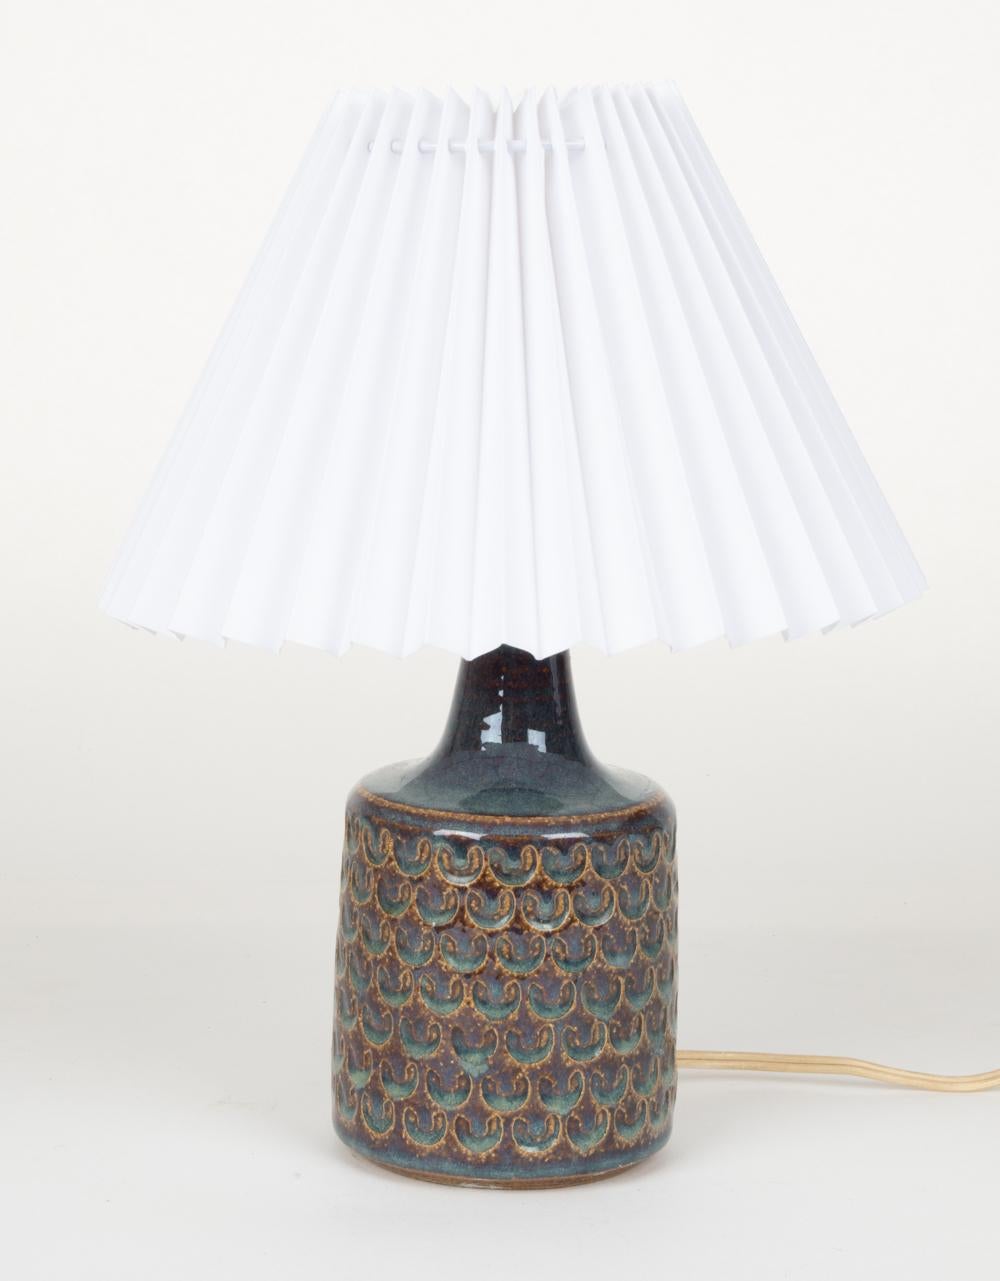 A stylish petite Scandinavian mid-century table lamp with a patterned ceramic surface in stunning mottled turquoise and mustard glaze. Designed by Einar Johansen and produced by Soholm Stentoj, this charming Danish modern lamp is a product of